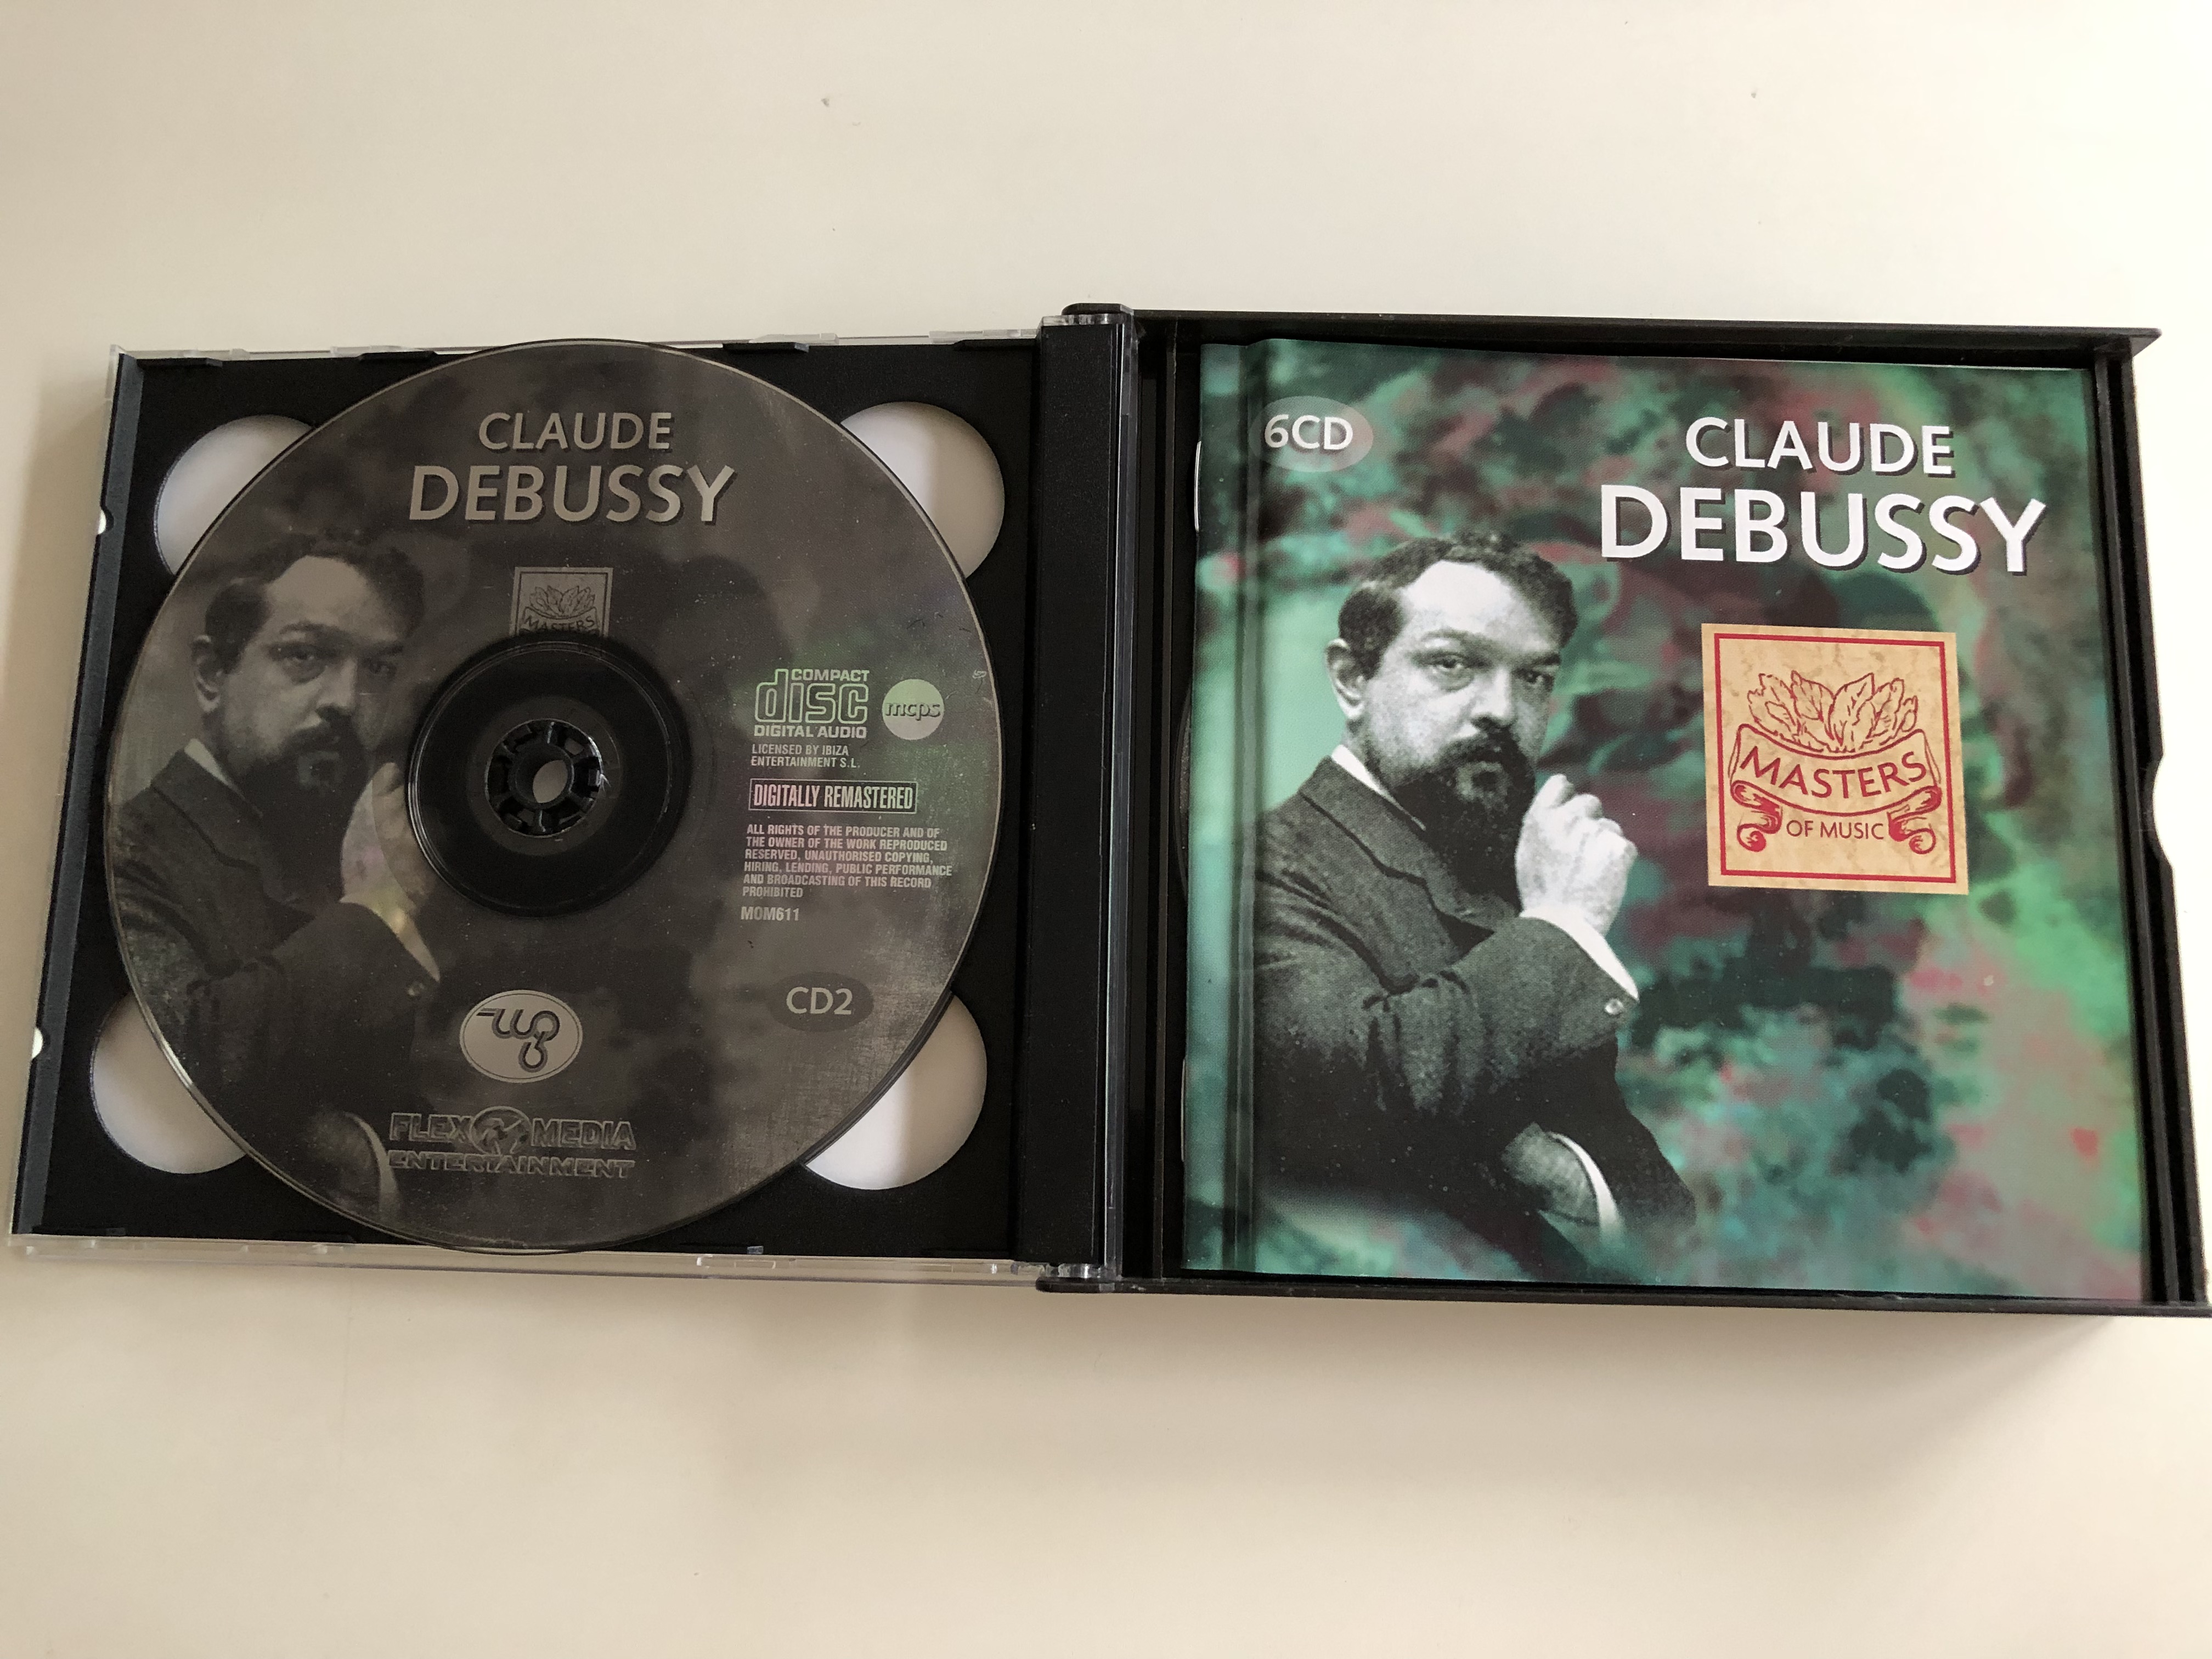 claude-debussy-doctor-gradus-ad-parnassum-jimbo-s-lullaby-serenade-for-the-doll-the-snow-is-dancing-the-little-shepherd-gollwogg-s-cake-walk-6-cd-masters-of-music-mom-611-4-.jpg